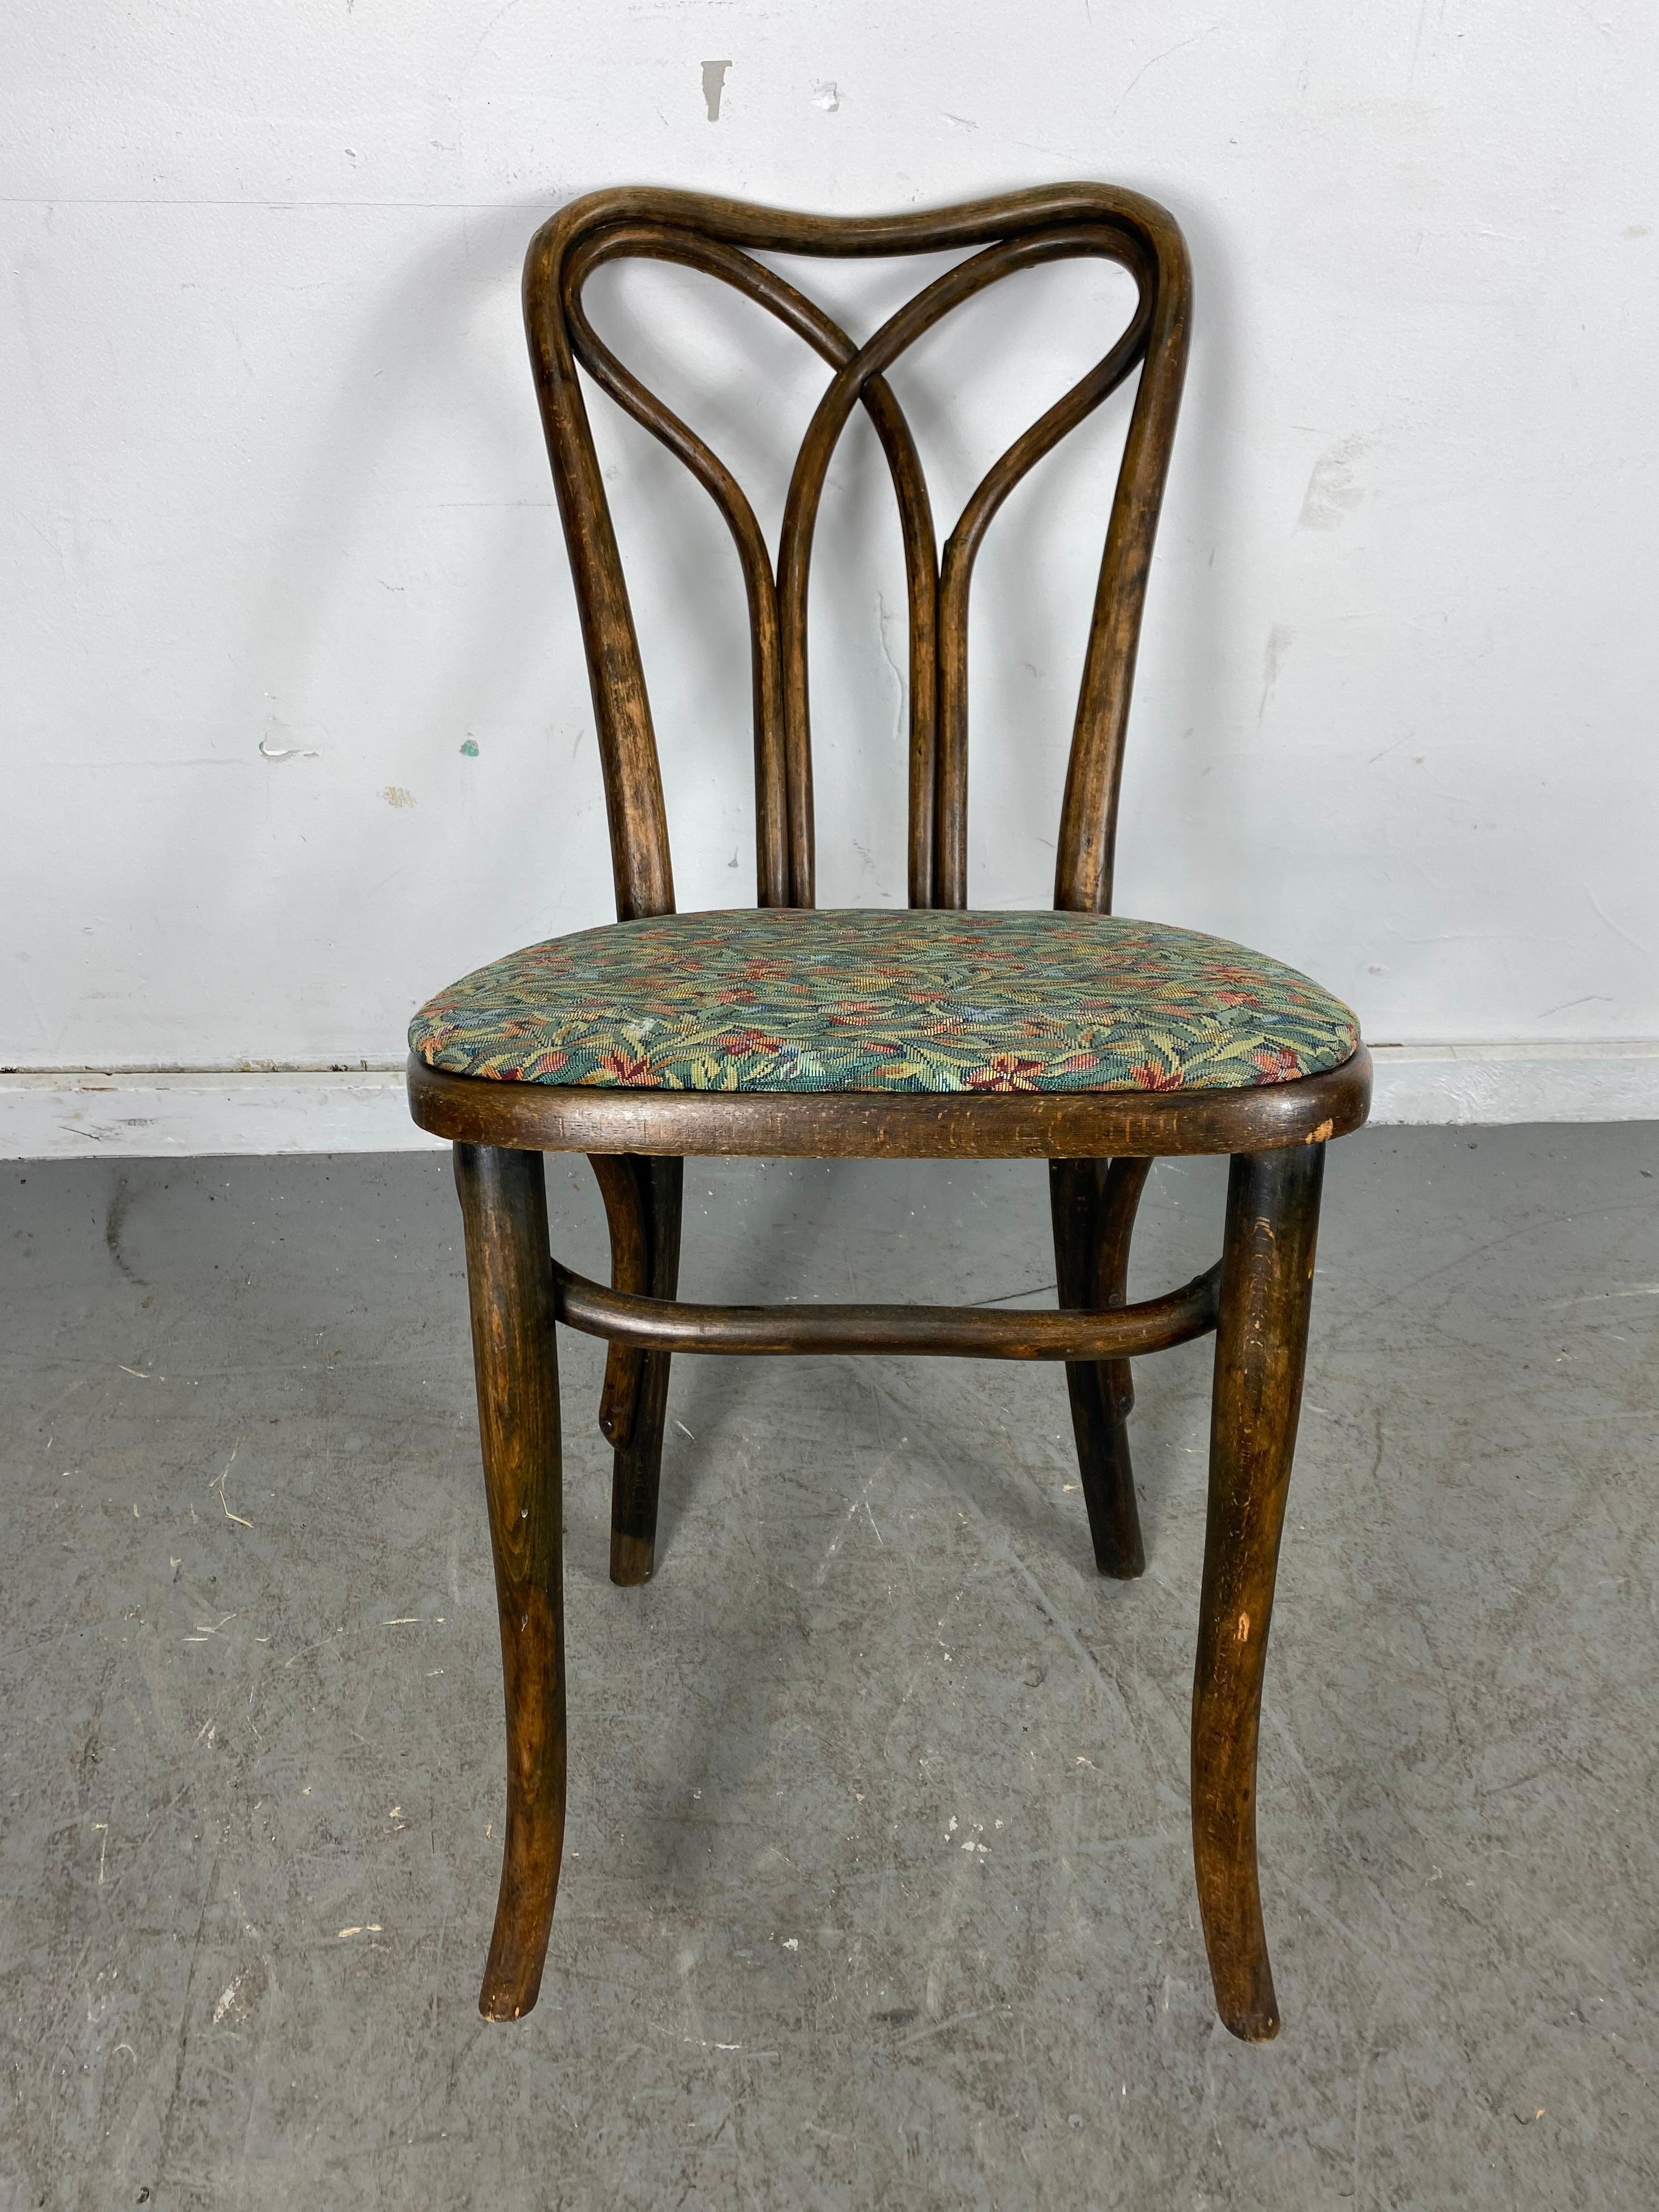 Austrian Art Nouveau Bentwood Side Chair Attributed to J & J Kohn, Early 1900's In Good Condition For Sale In Buffalo, NY